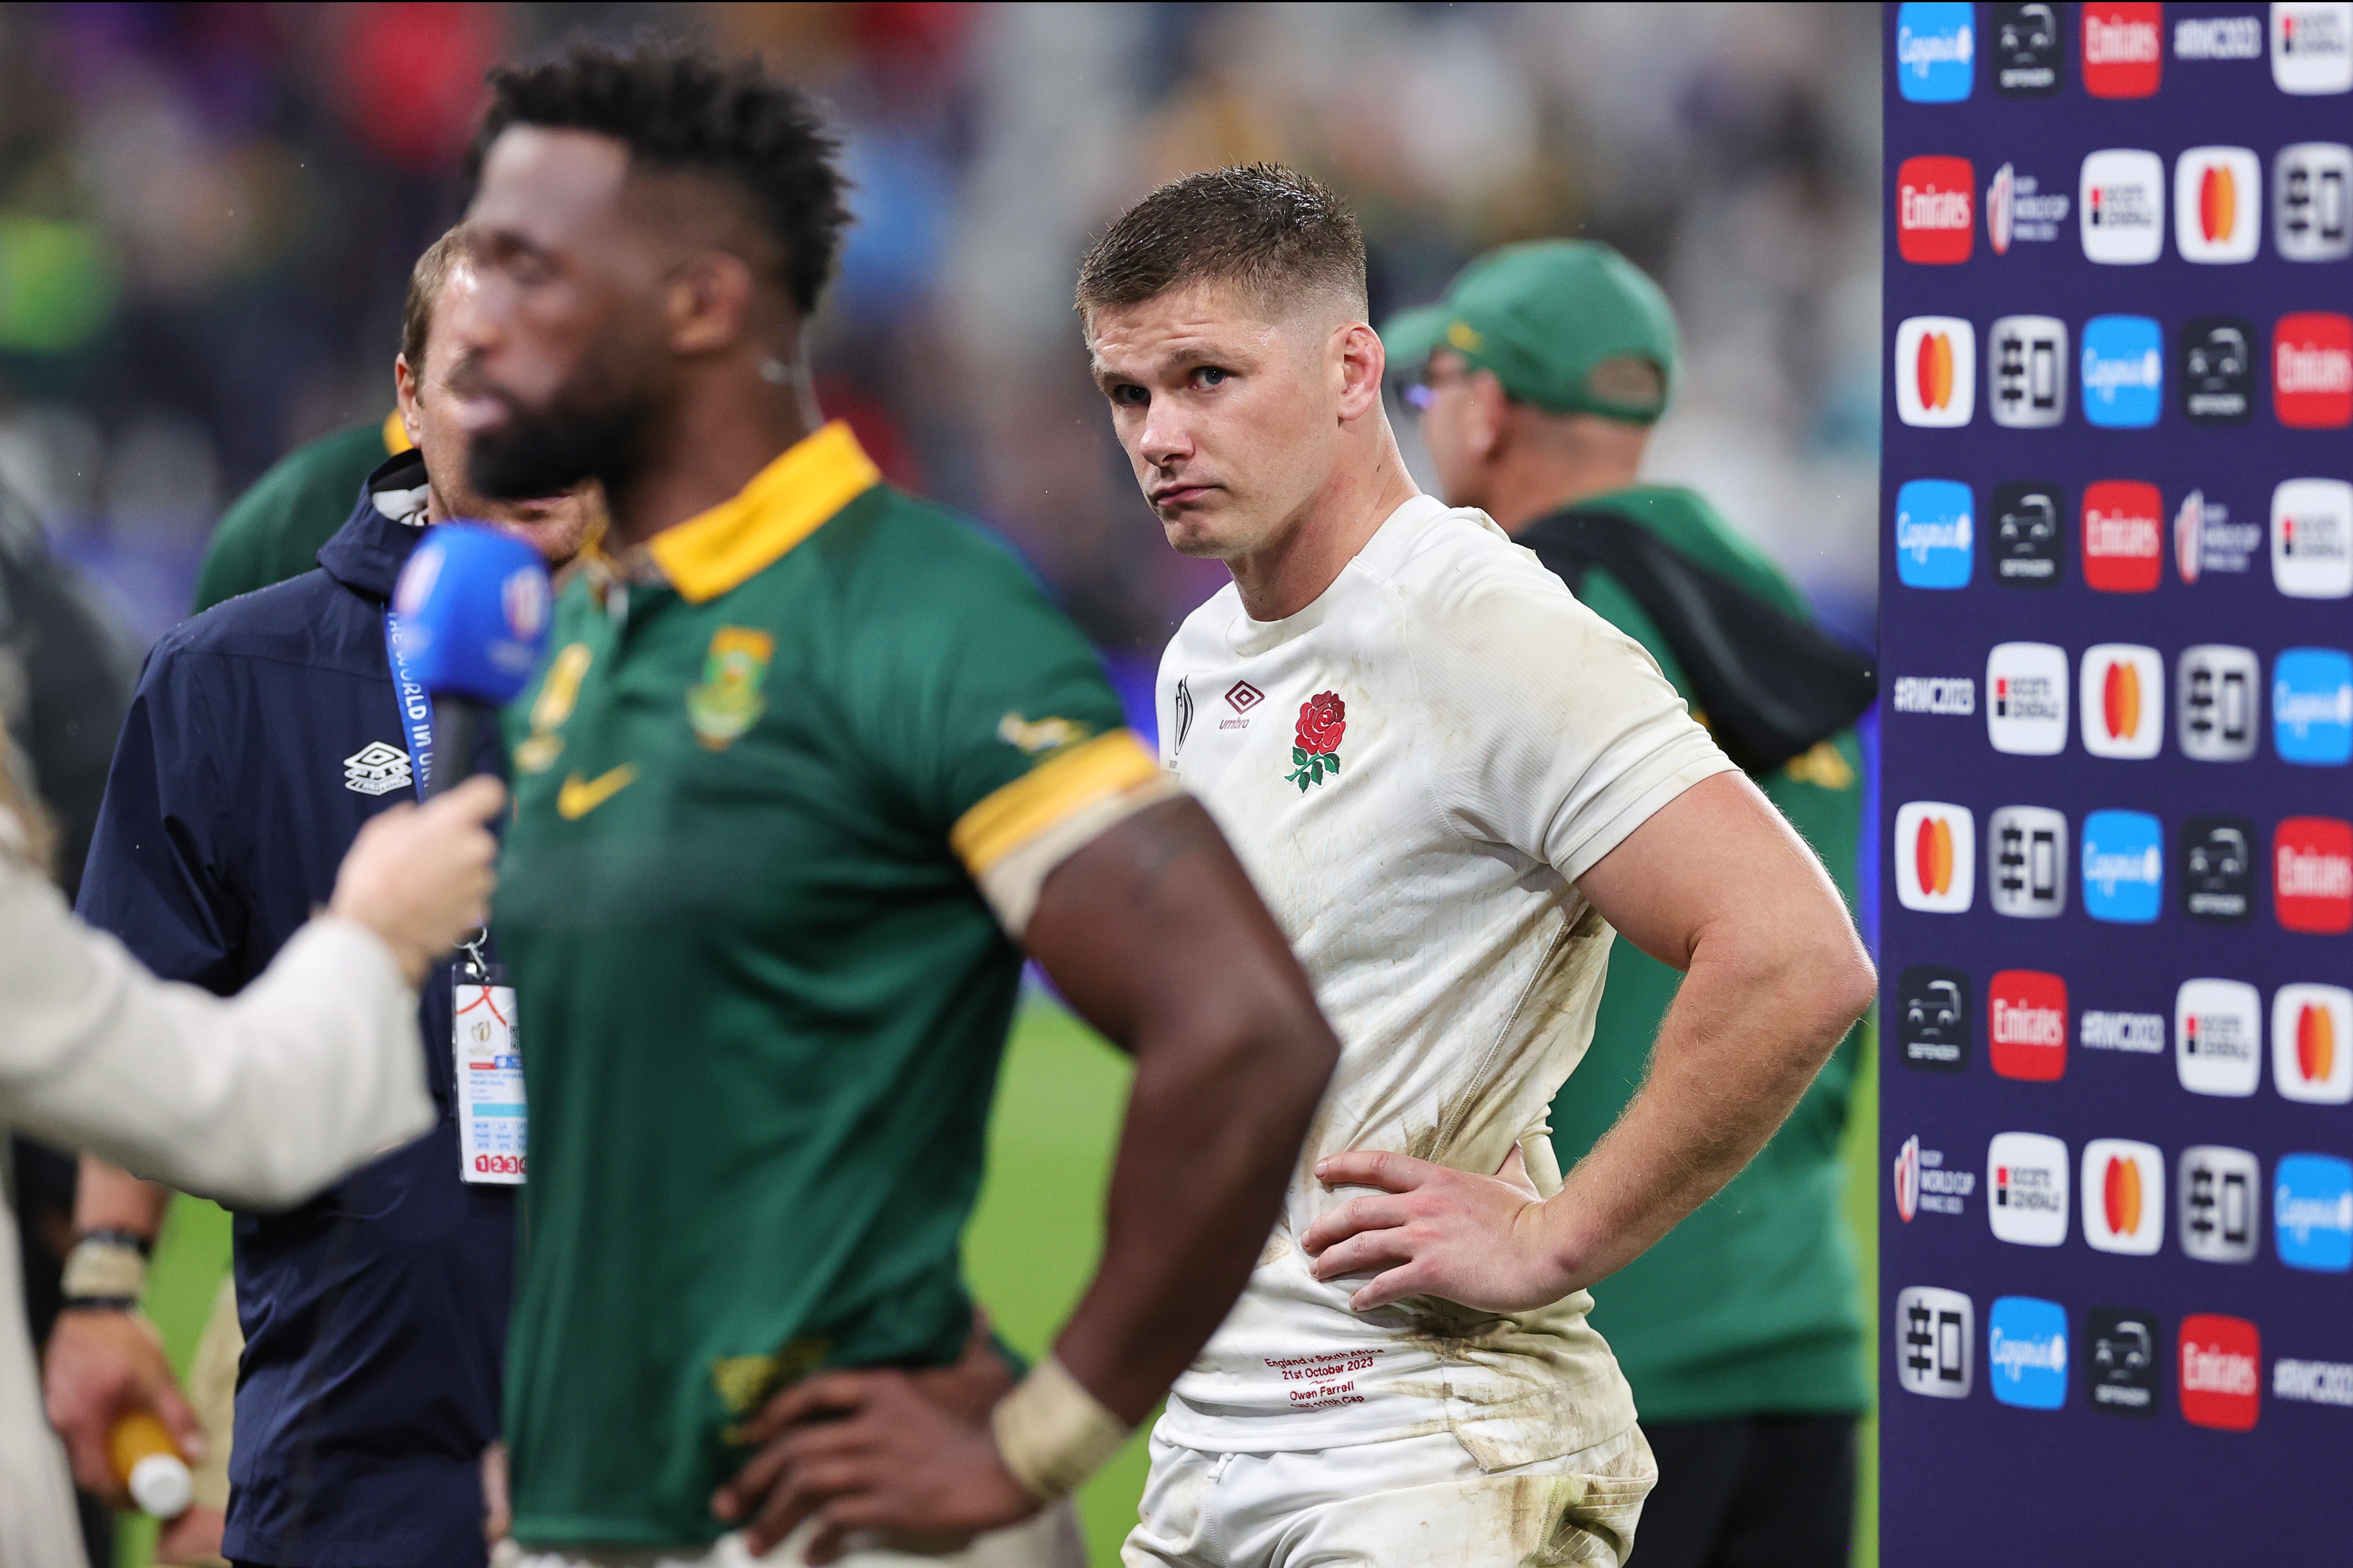 England, captained by Owen Farrell, narrowly missed out on a place in the World Cup final